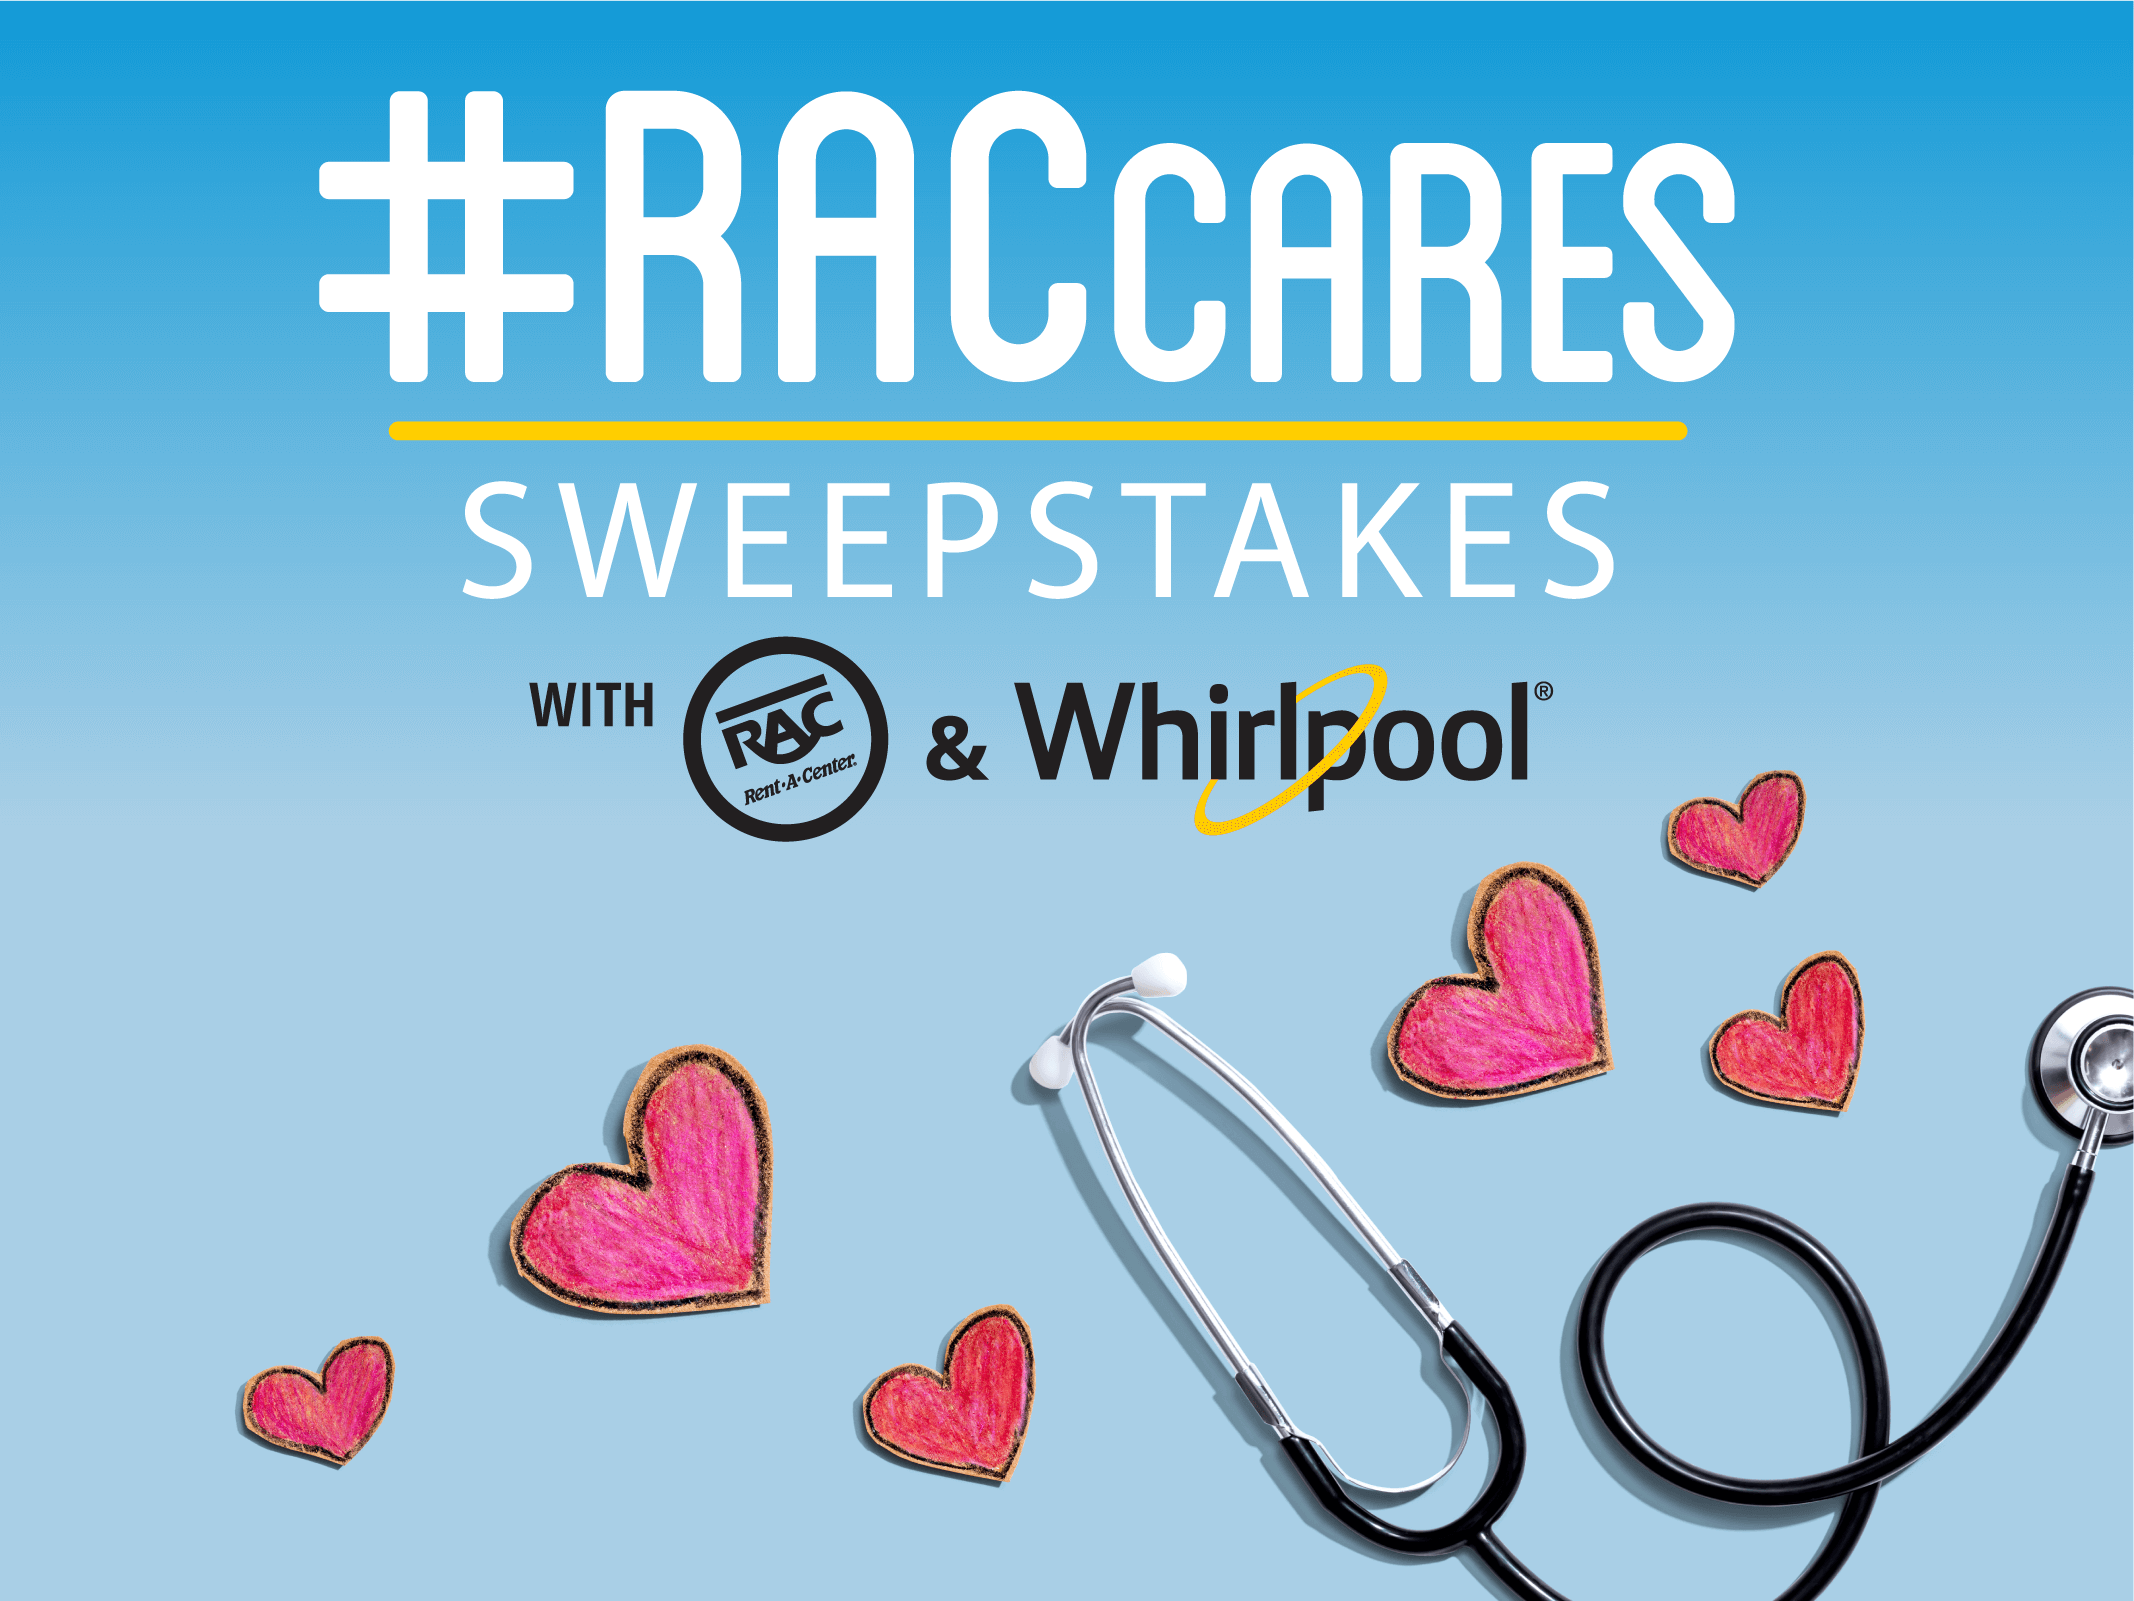 #RACCares Sweepstakes with Rent-A-Center and Whirlpool